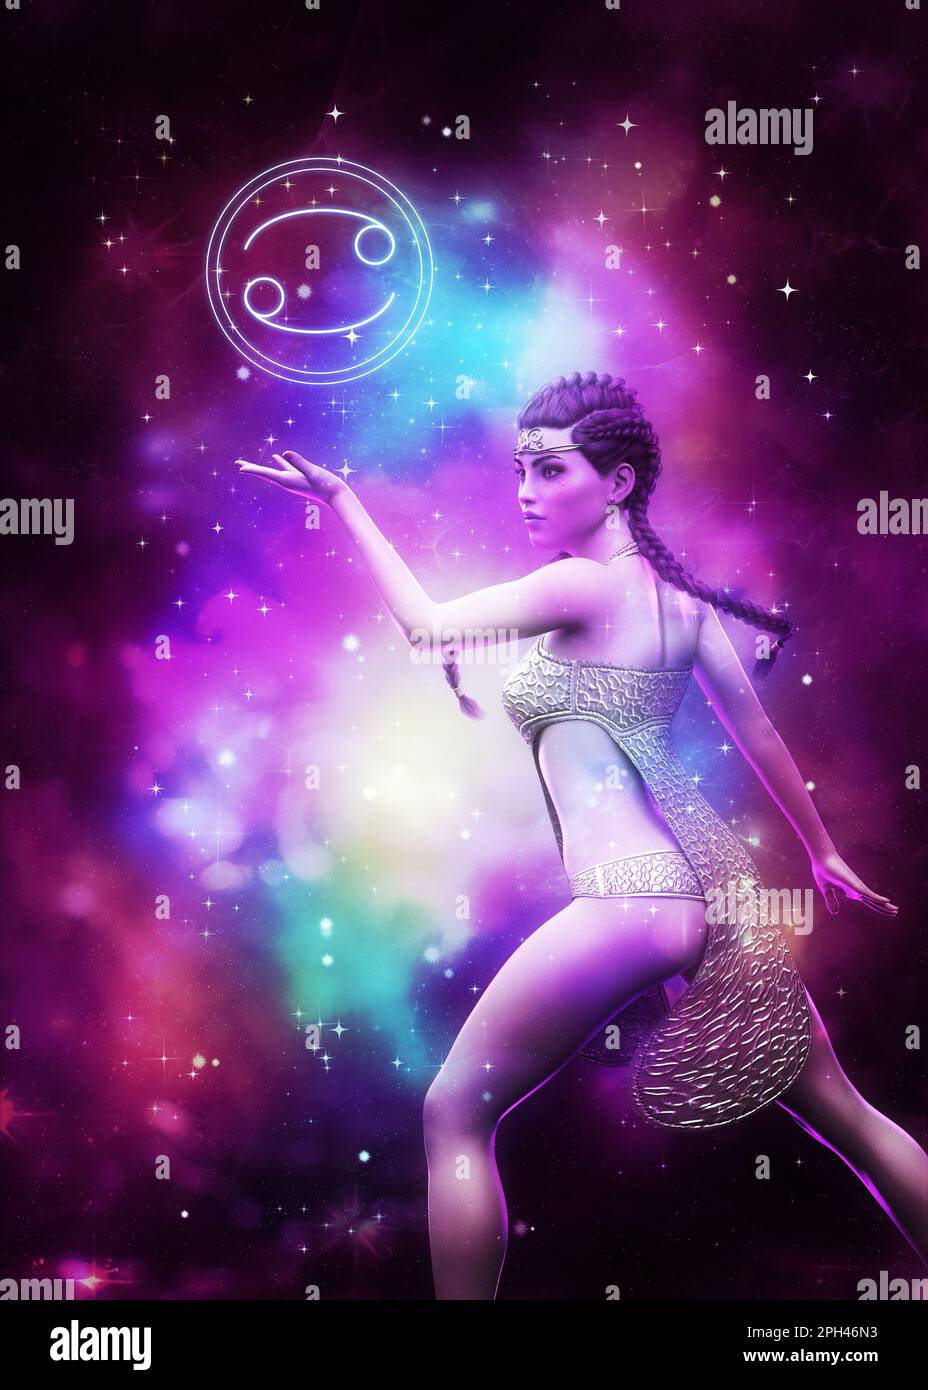 Fantasy girl with purple braided hair and silver outfit as Cancer zodiac sign, 3D Illustration. Stock Photo